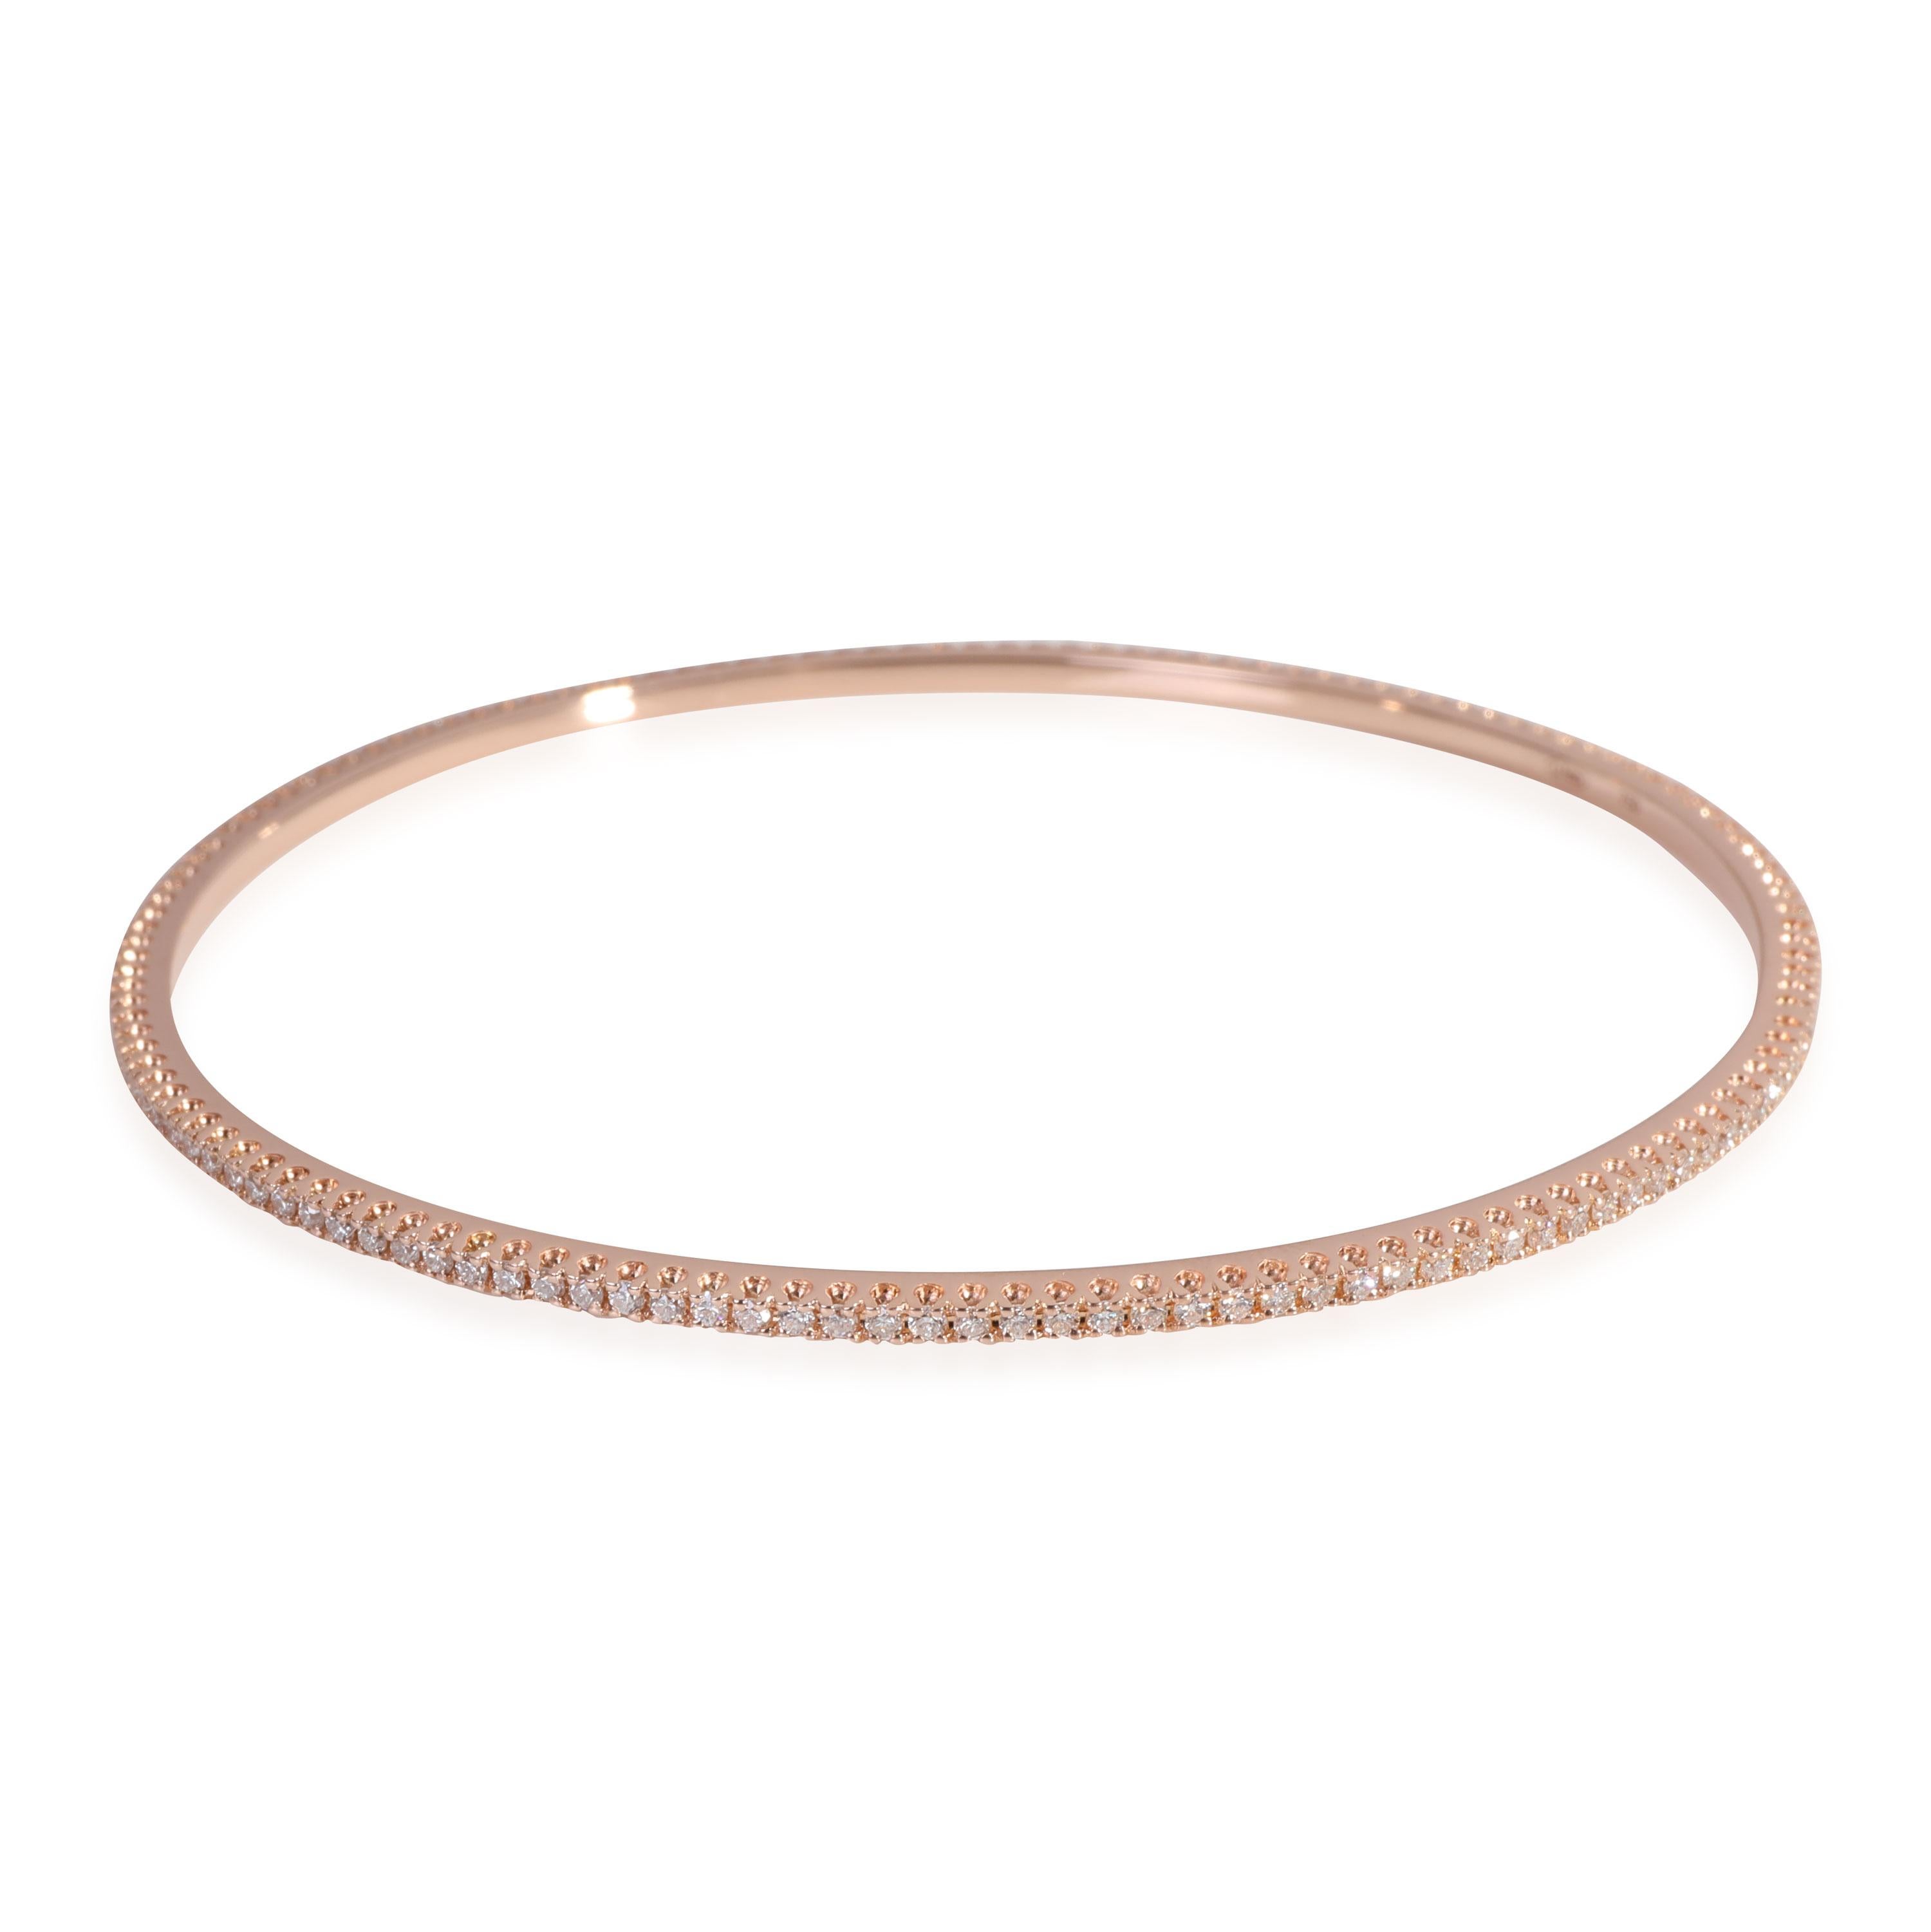 La Reina Diamond Bangle in 18k Rose Gold 1 CTW In Excellent Condition For Sale In New York, NY